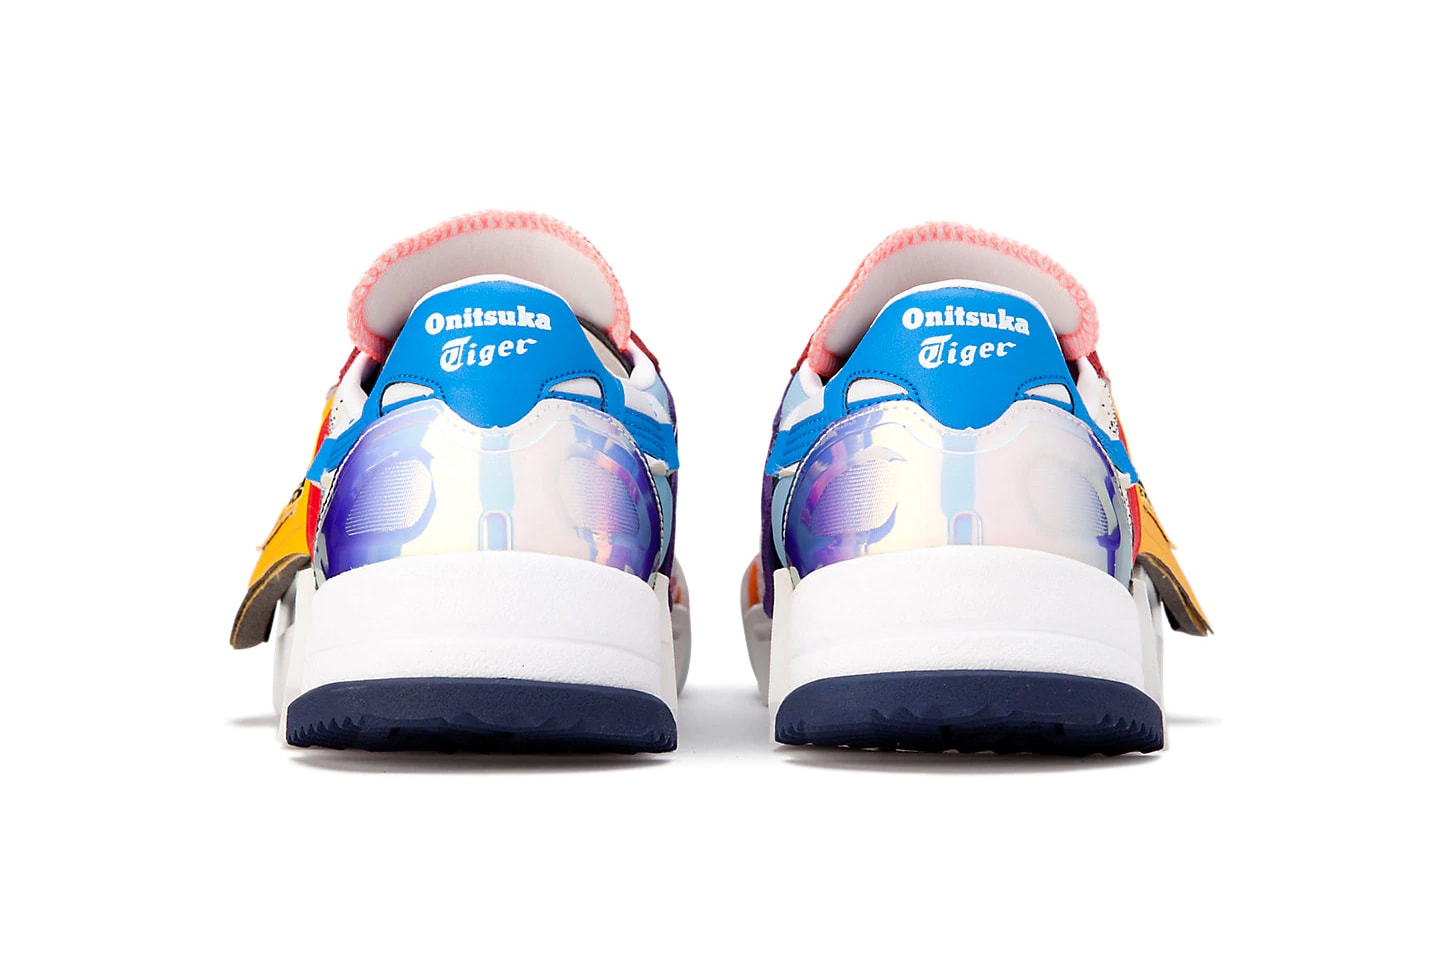 brian kenny onitsuka tiger nyc new york artist collaboration d-trainer boro vintage heritage patchwork